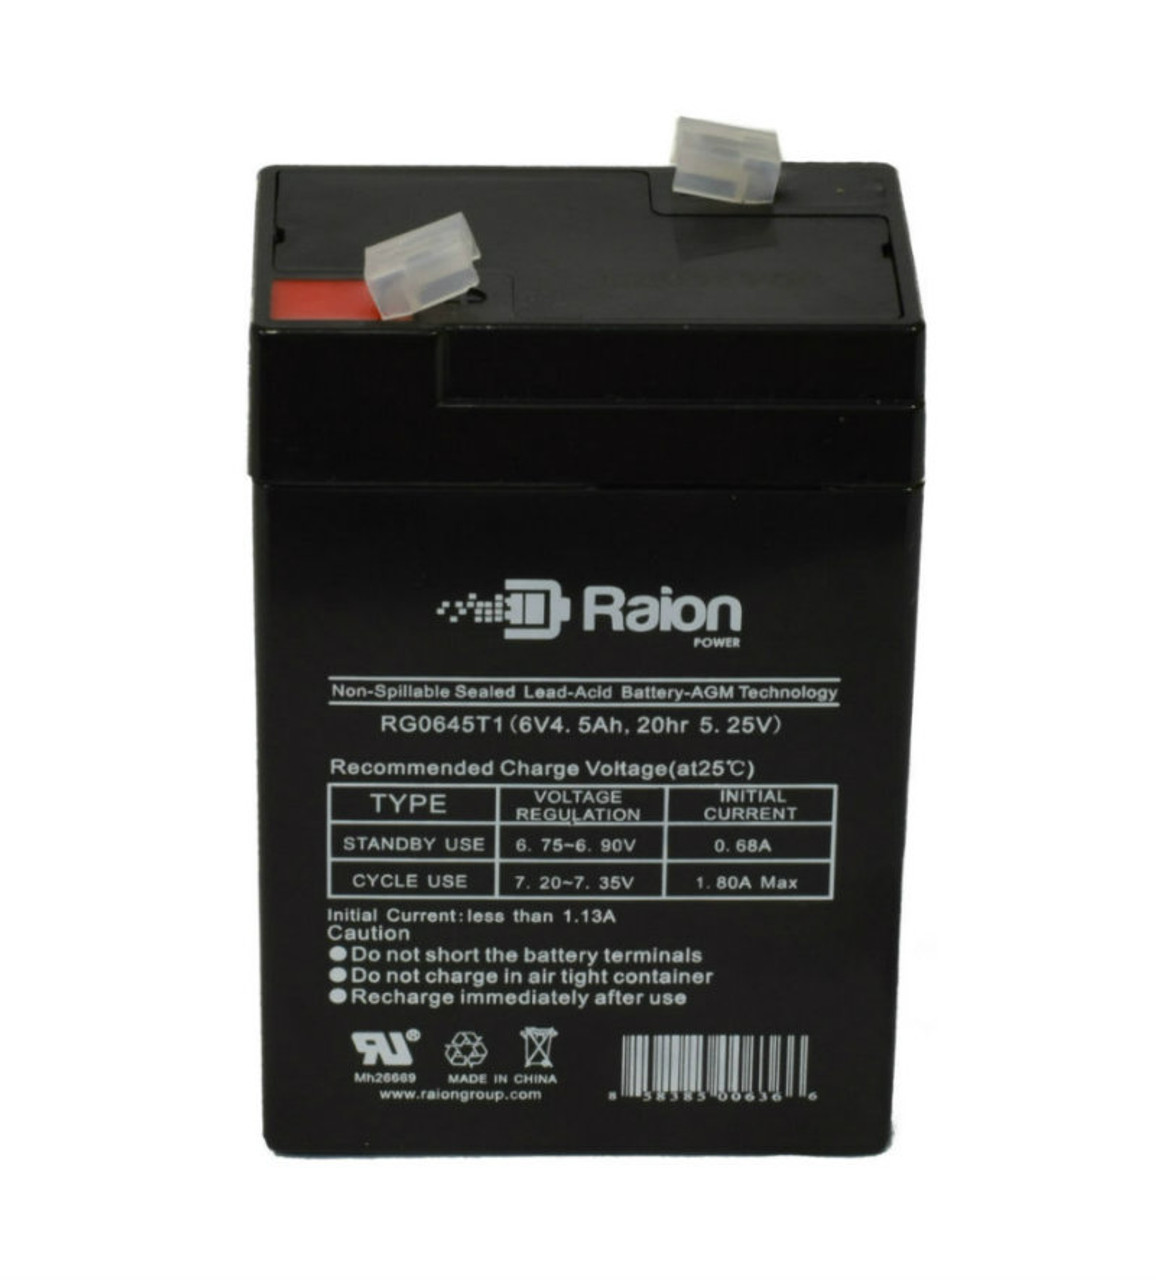 Raion Power RG0645T1 Replacement Battery Cartridge for Vision CP645